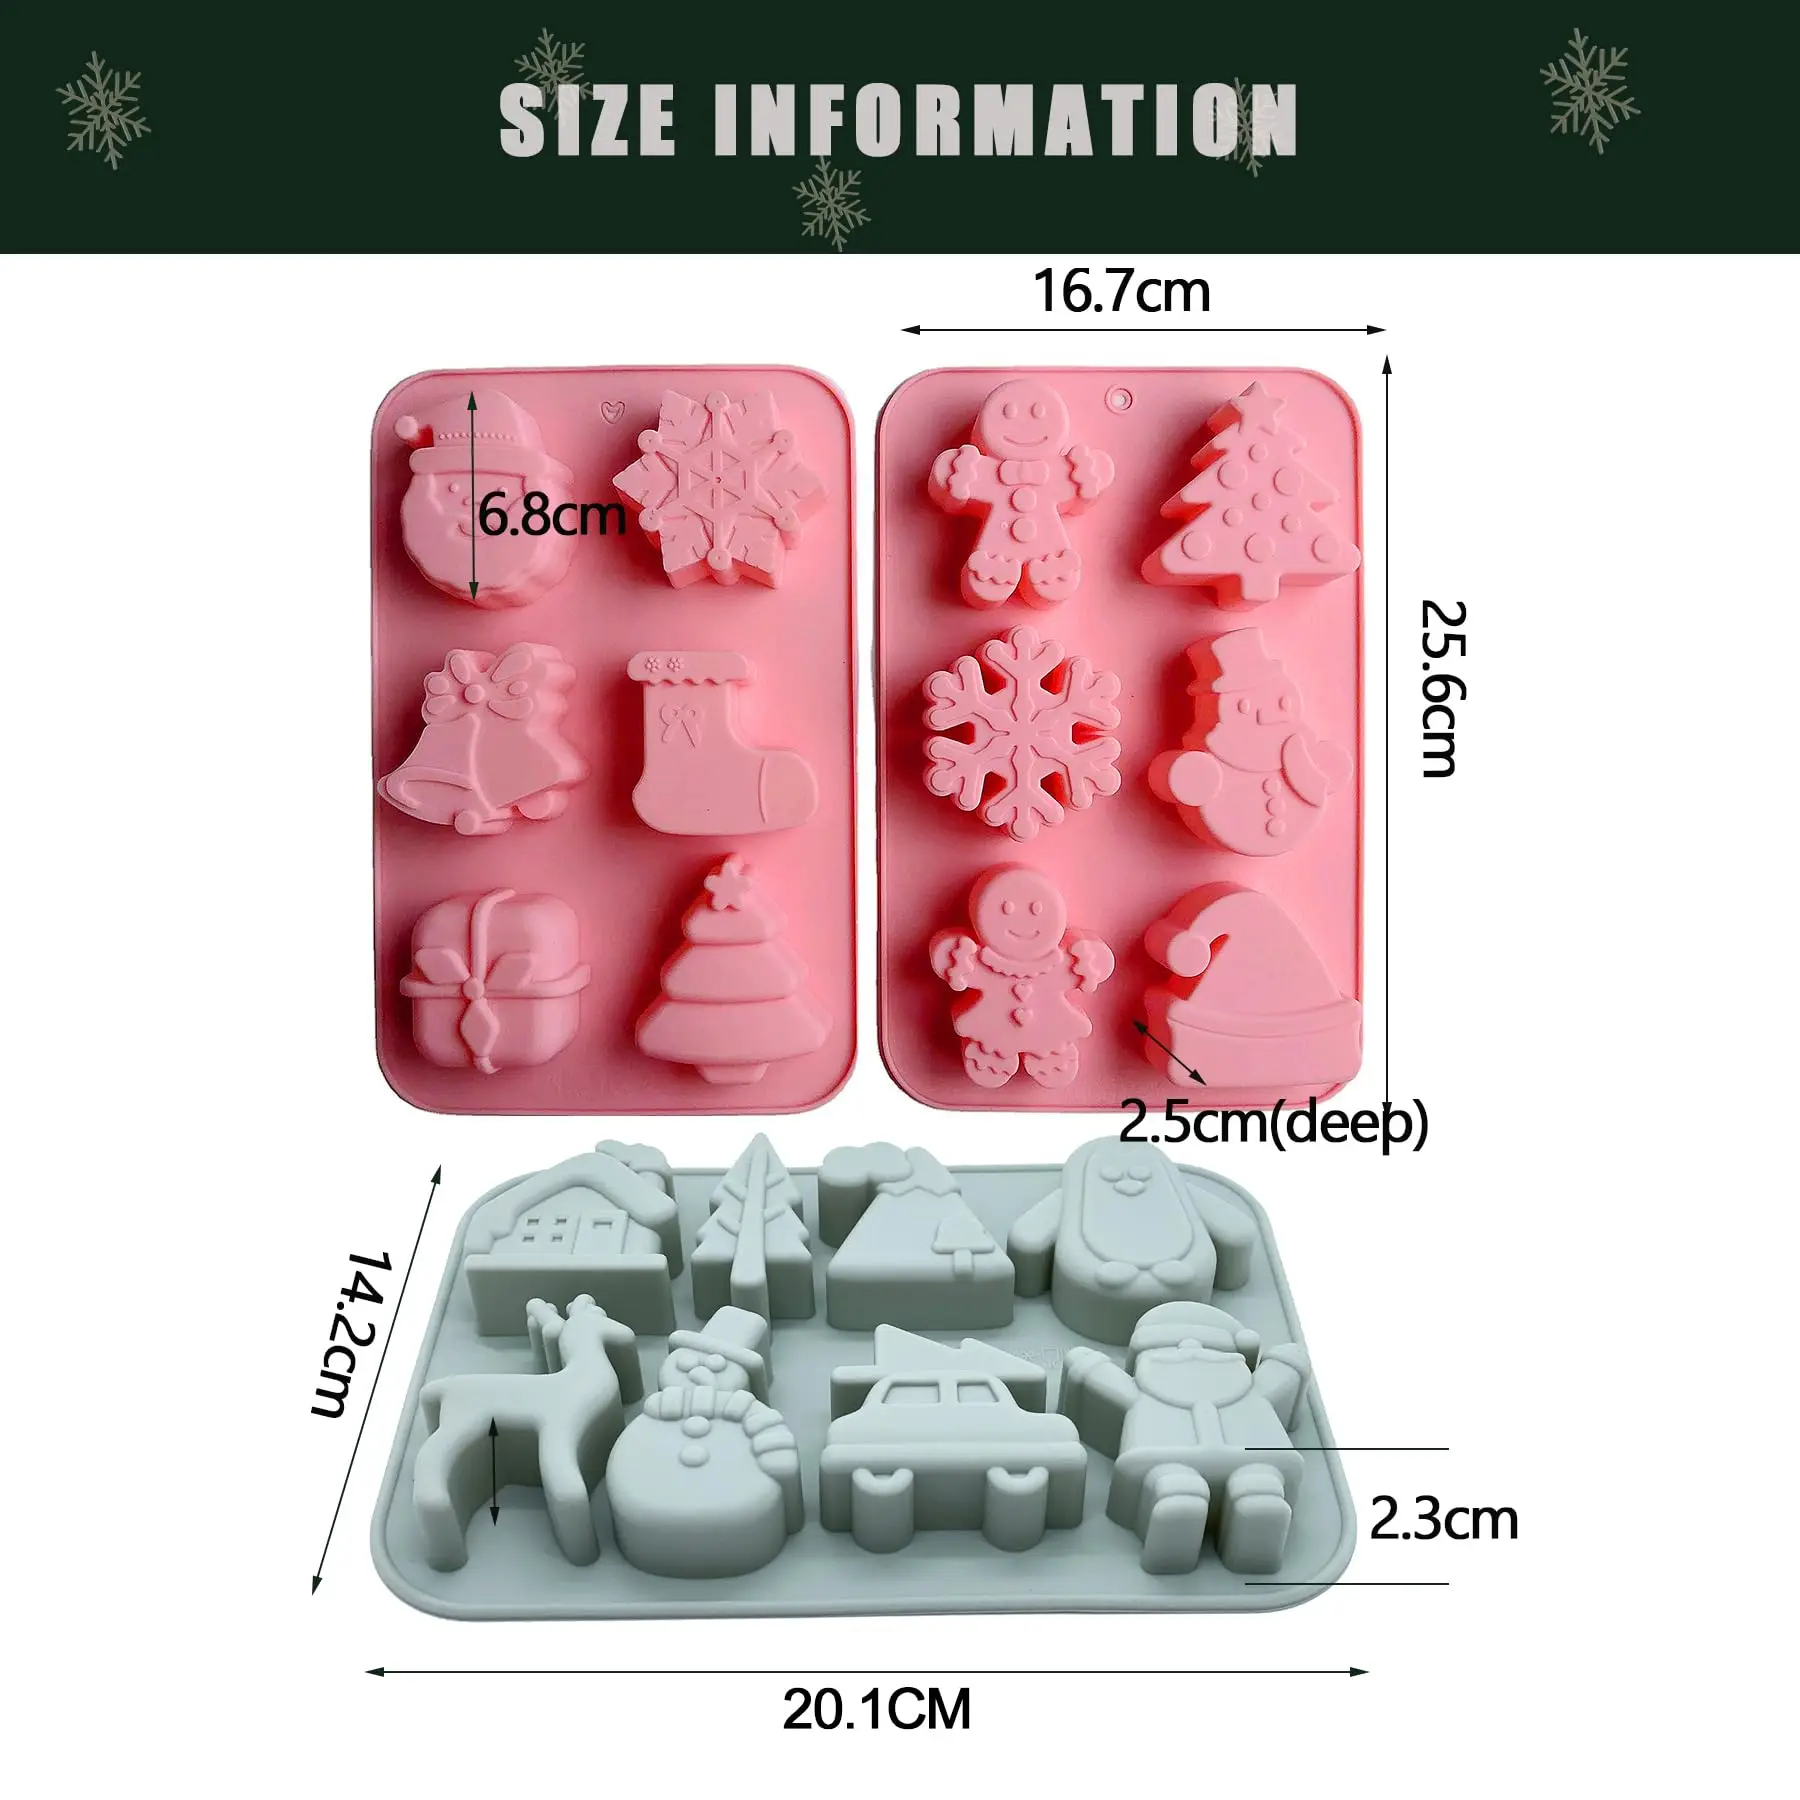 Christmas Silicone Molds For Baking, Nonstick Heat Resistant Silicone Christmas  Cake Molds, Large Size Santa Claus / Snowman / Christmas Tree Shape Baking  Molds For Mini Cakes, , Soap, Candles, Bpa-free, Microwave